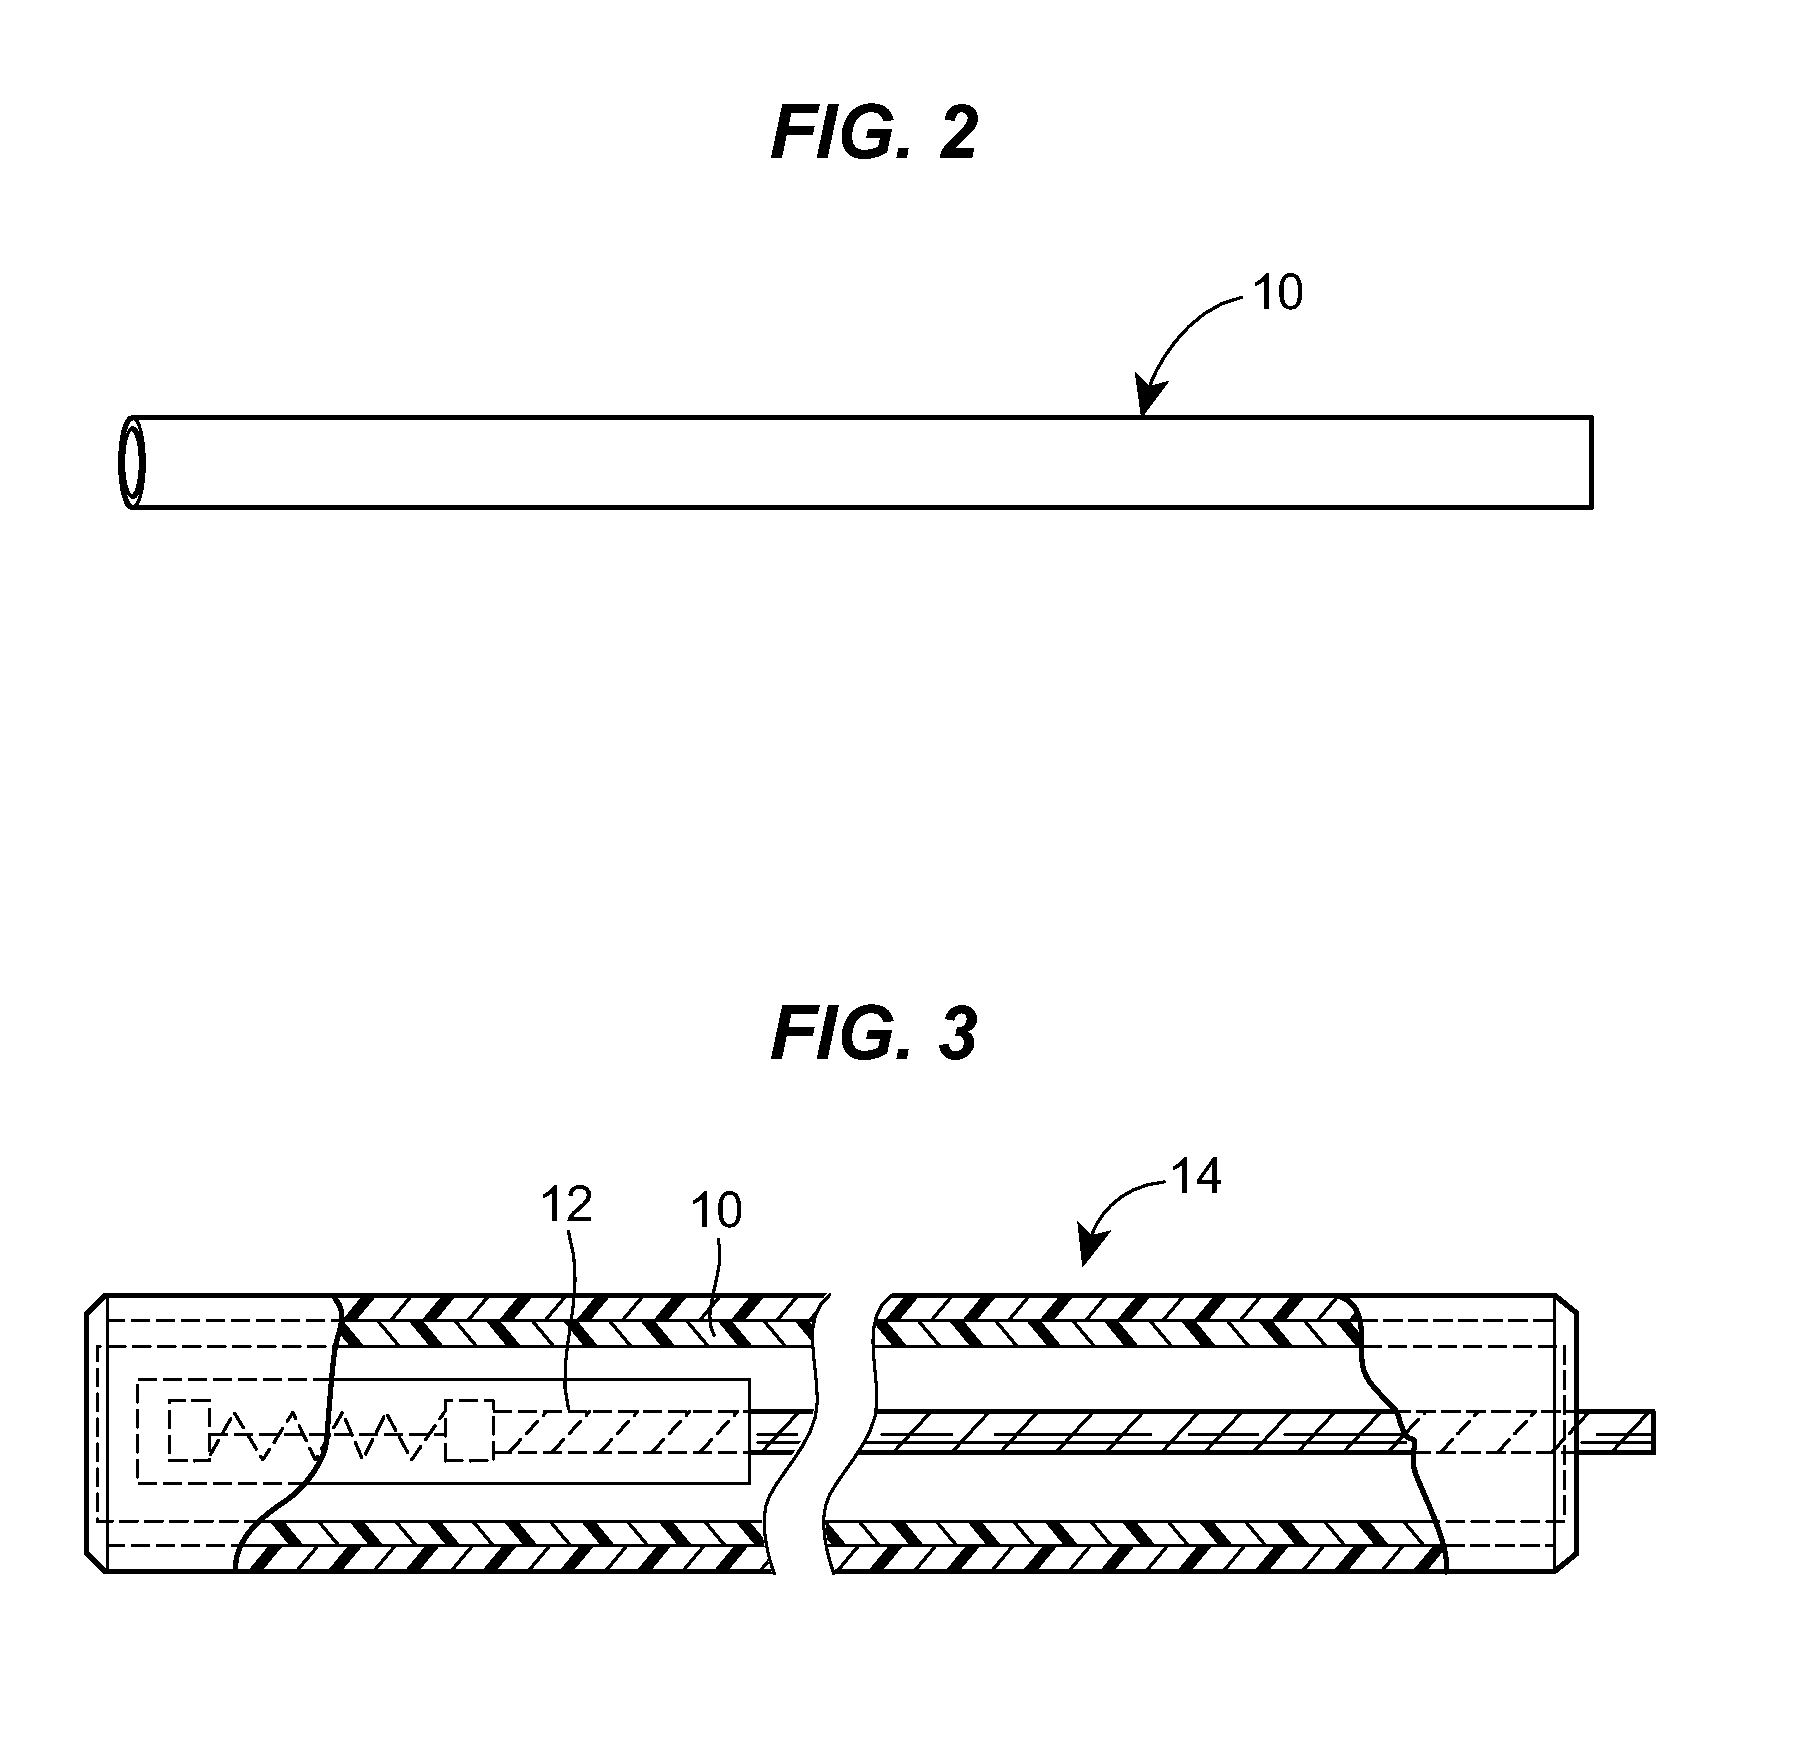 Metal-hydrate containing arc-extinguishing compositions and methods